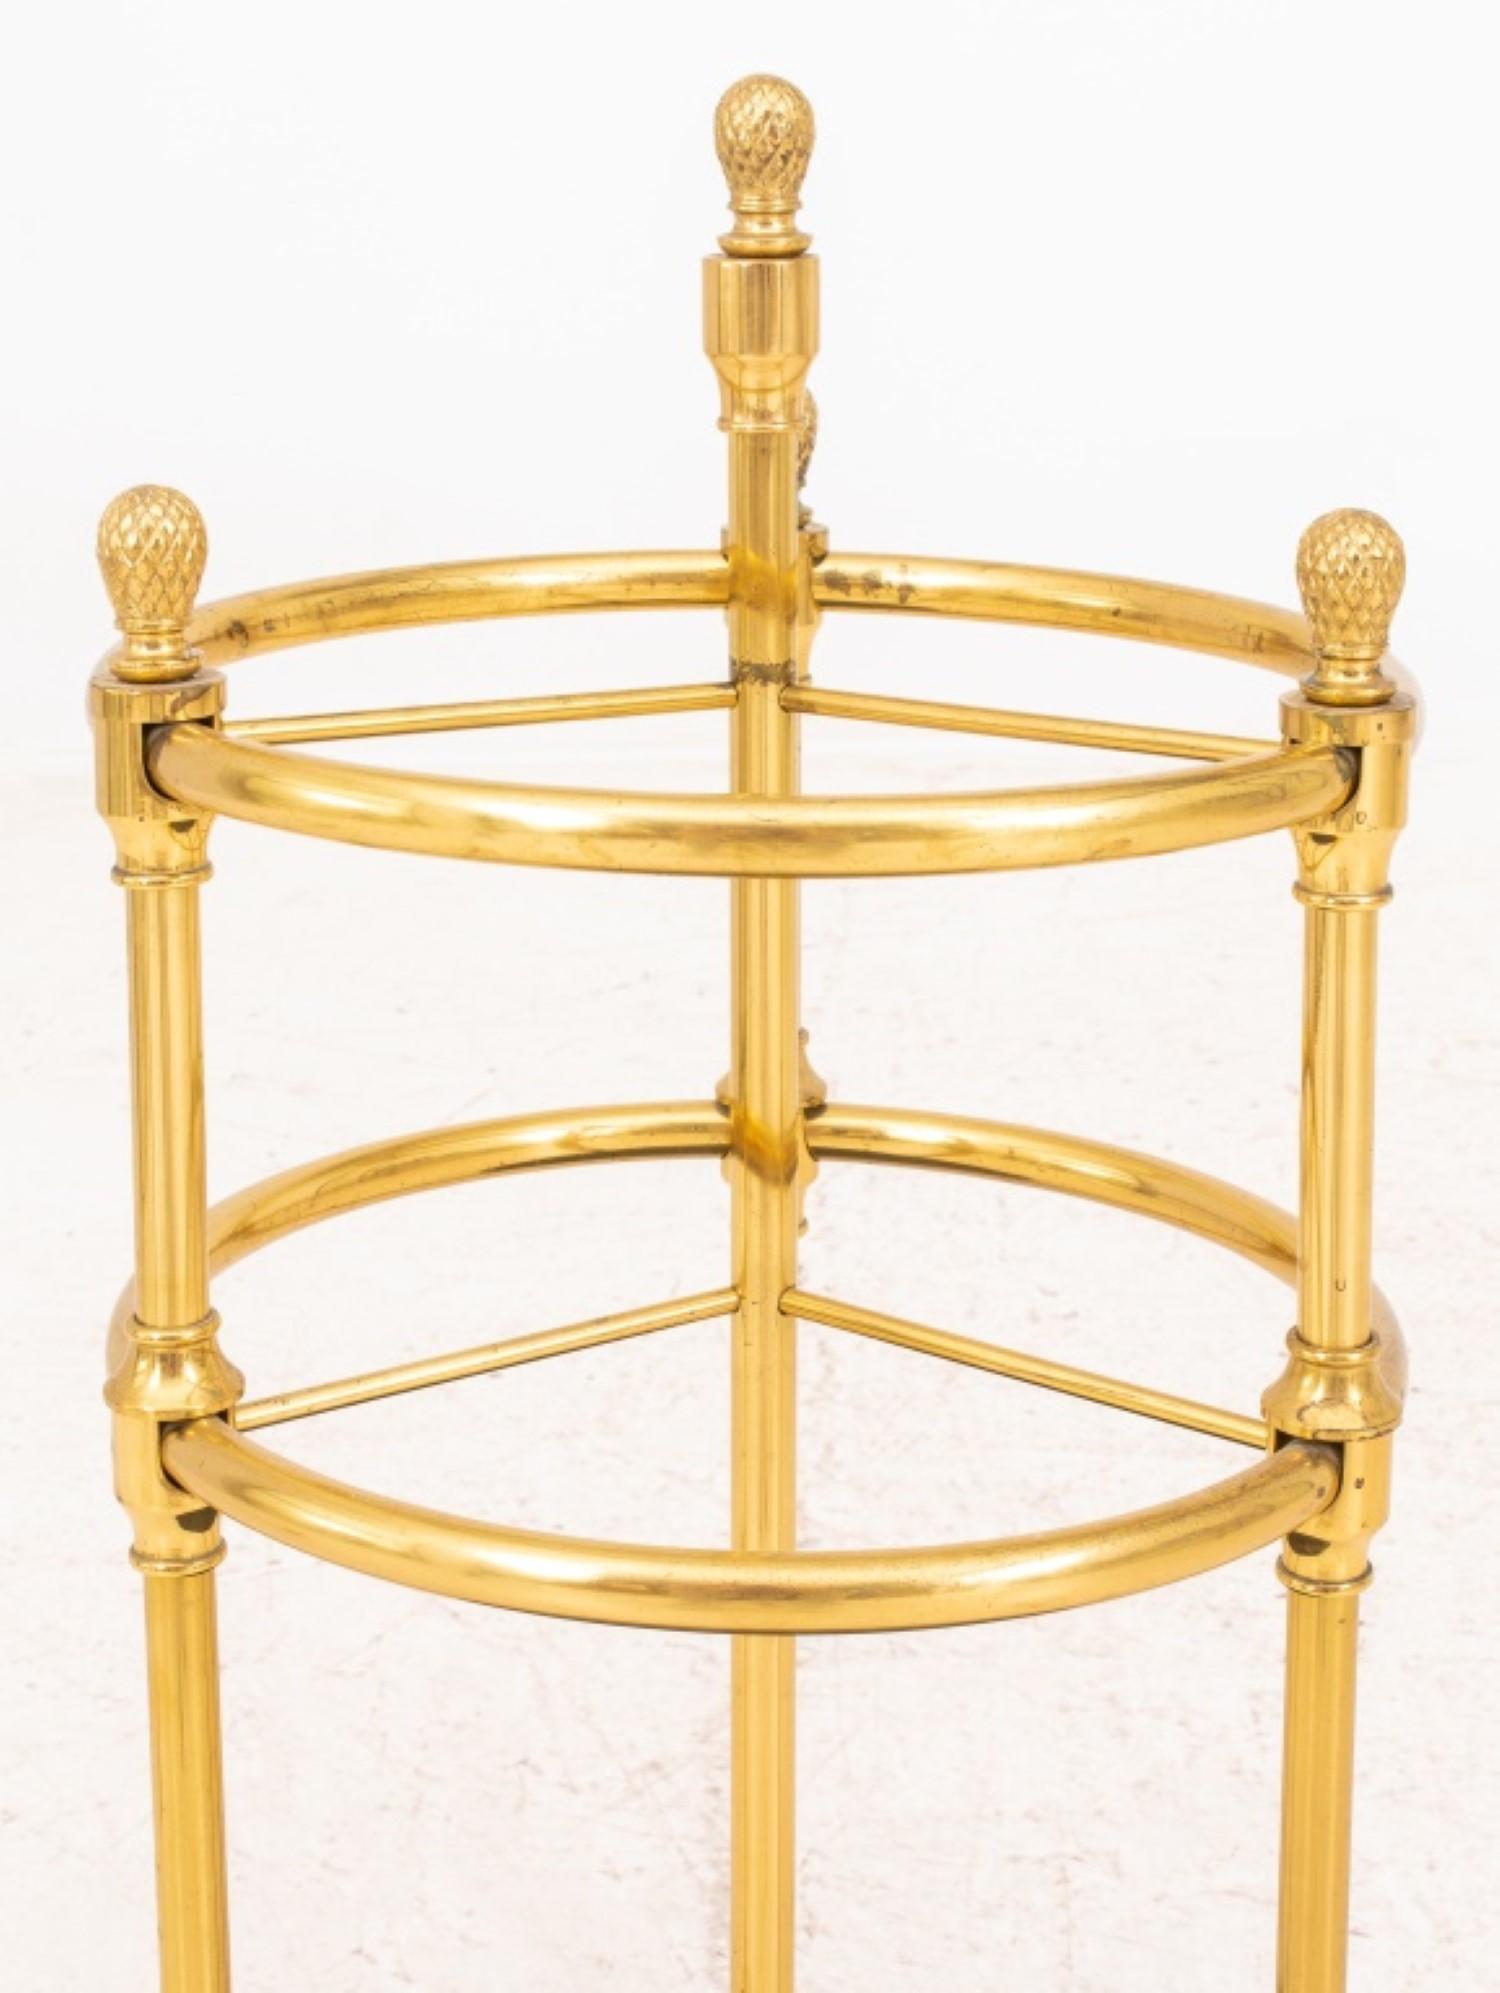 20th Century Neoclassical Brass Umbrella Stand / Cane Rack For Sale